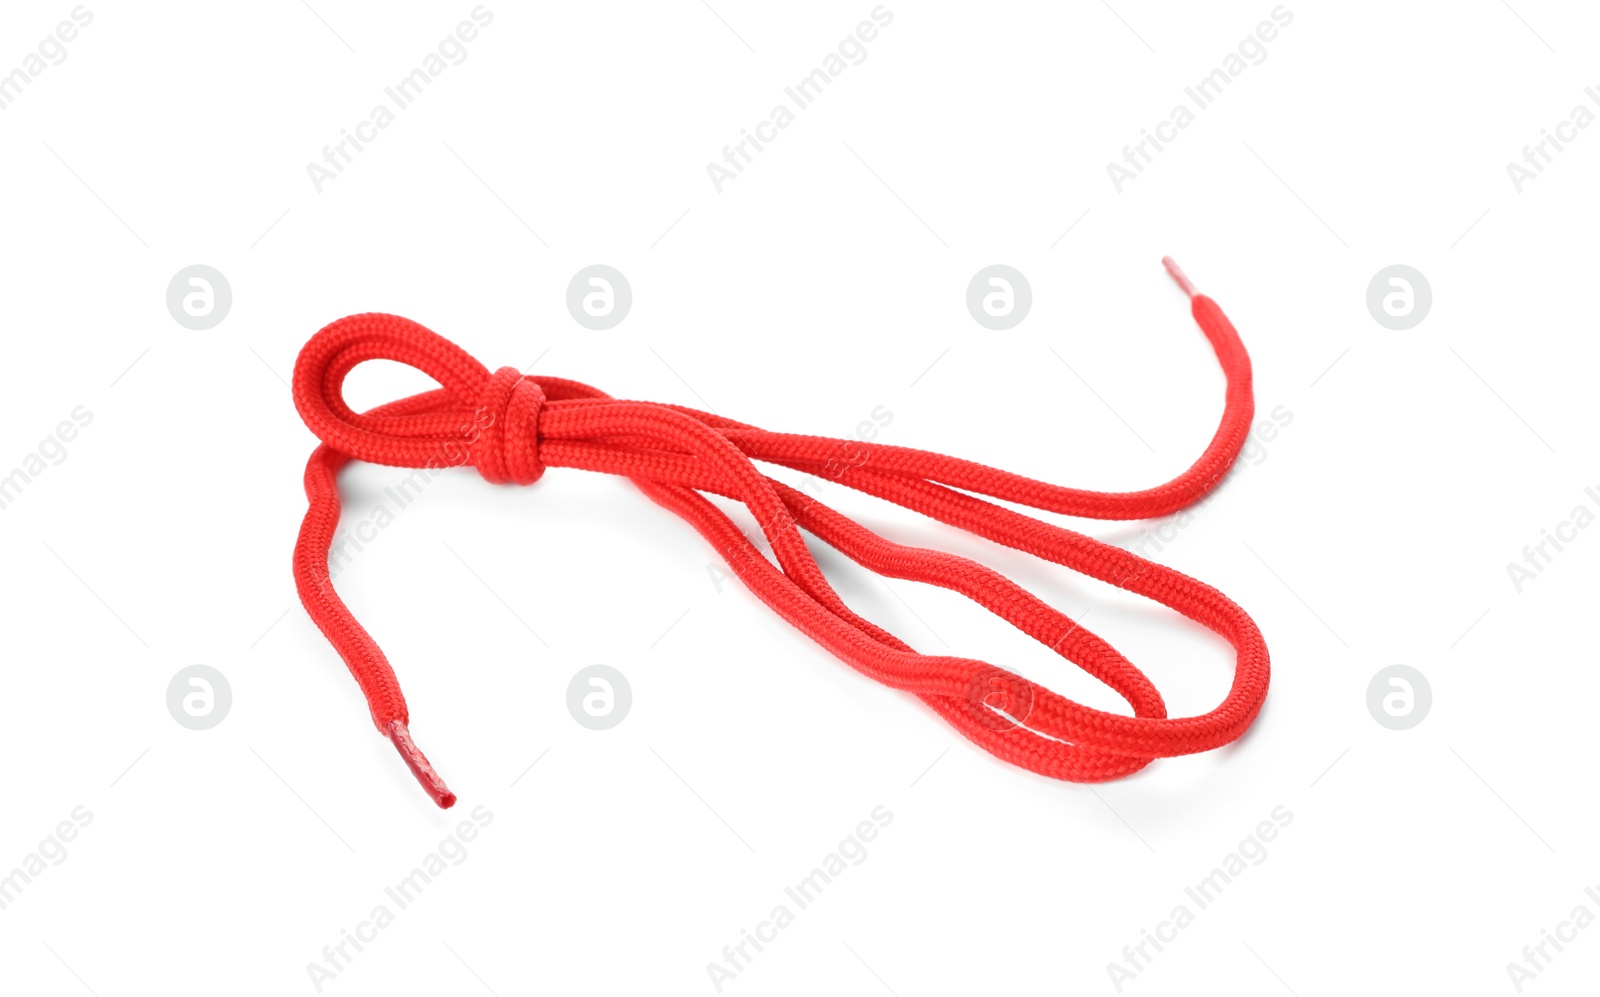 Photo of Red shoe lace tied in knot isolated on white